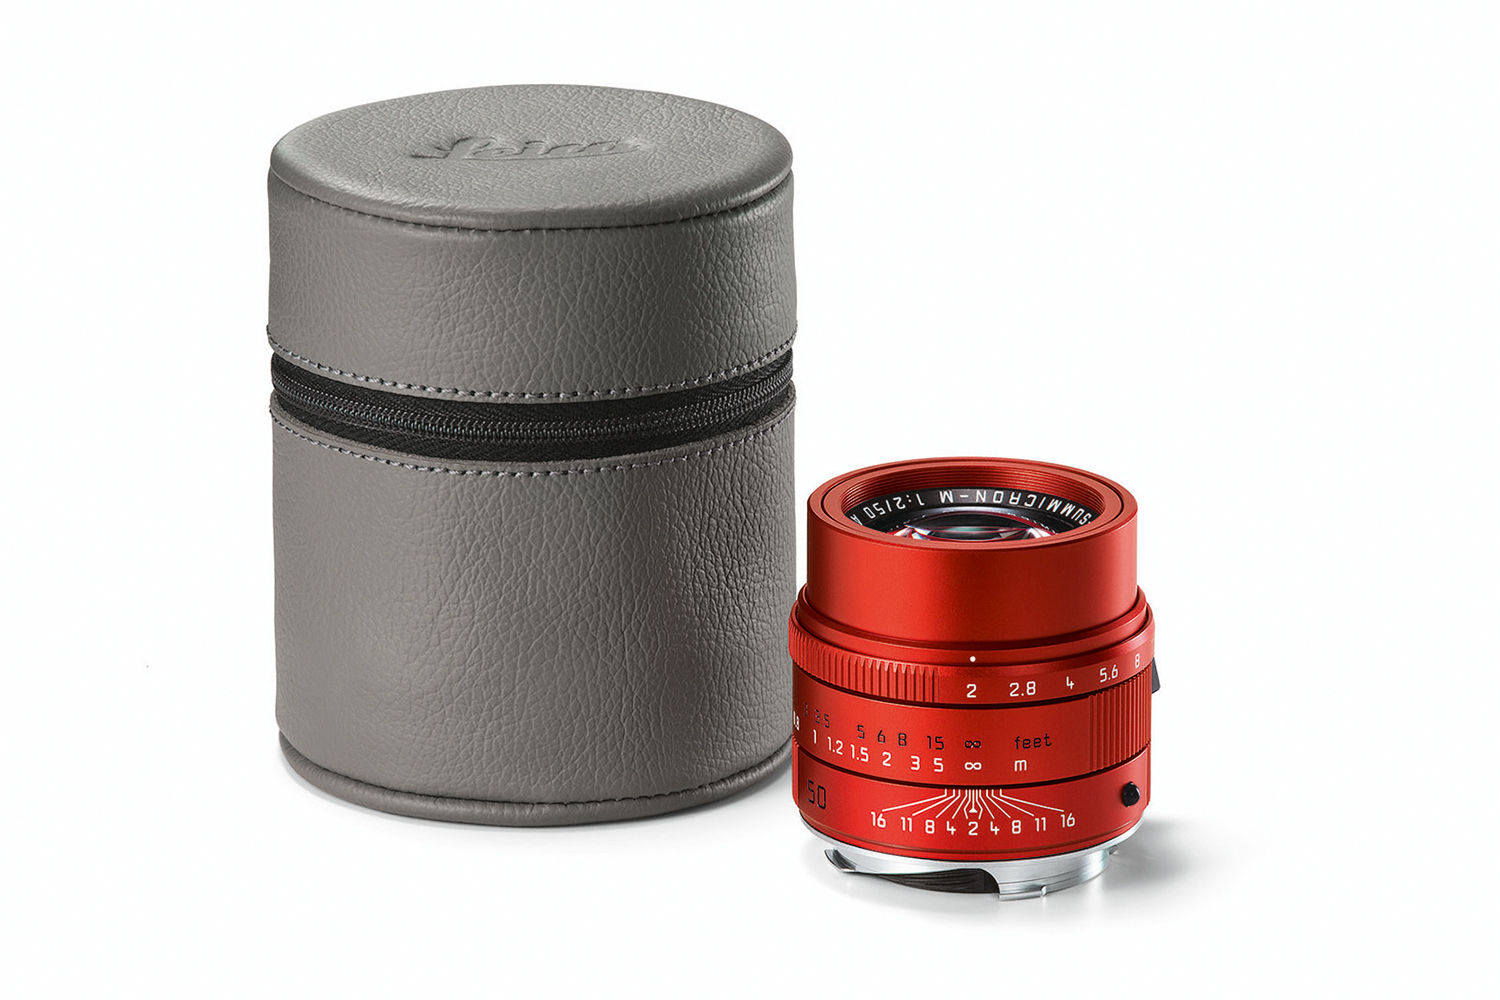 leica first special edition lens apo summicron m red grey leather hood cmyk